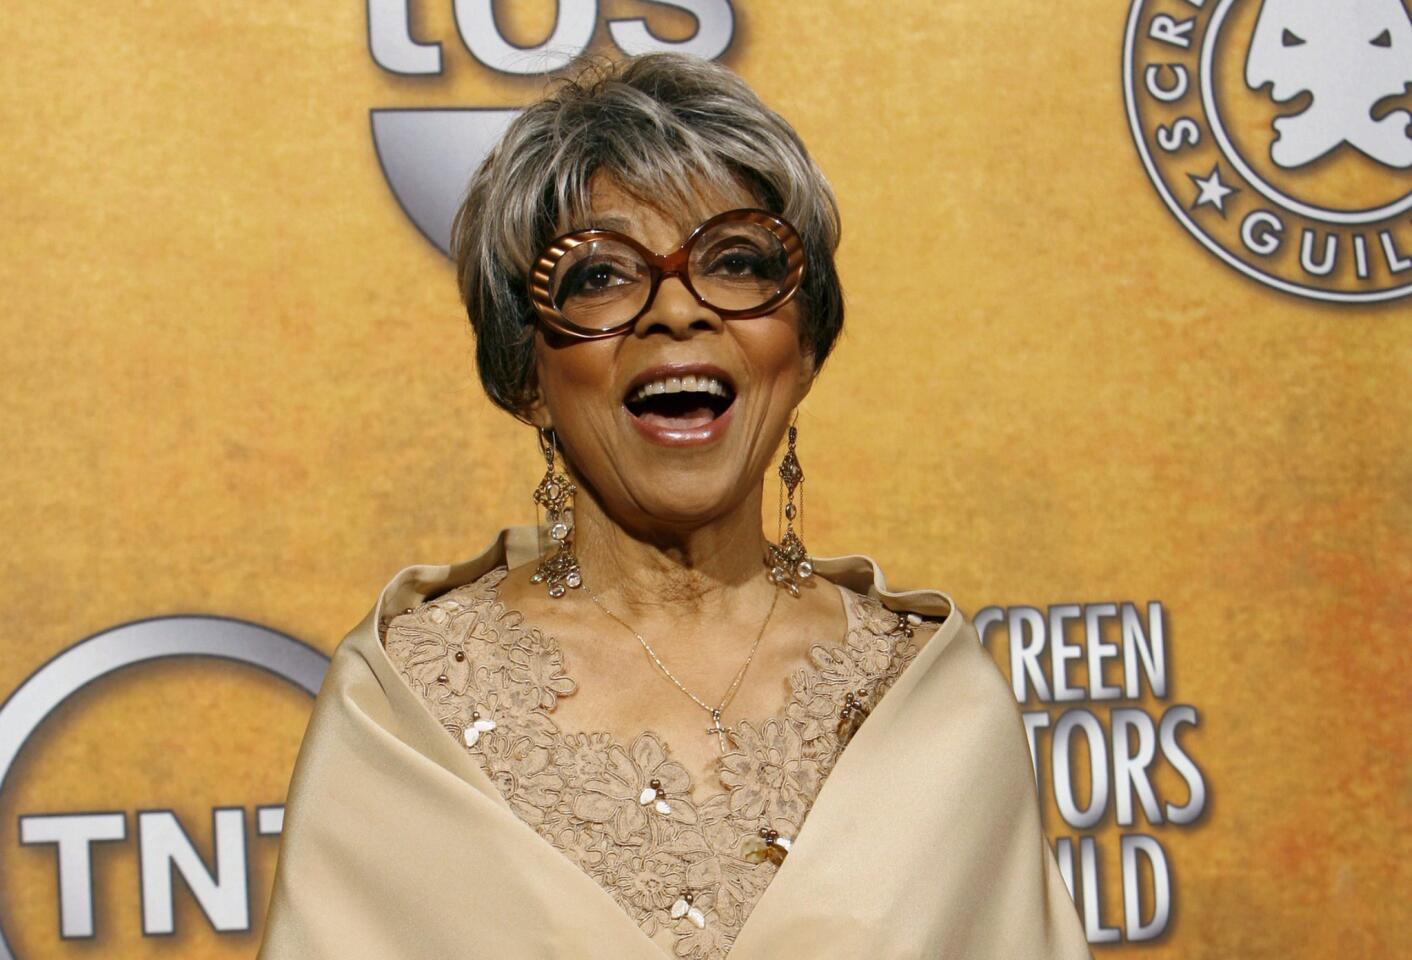 Actress and activist Ruby Dee died Thursday of age-related causes in New Rochelle, N.Y. Celebrities took to Twitter and other media to share their condolences.